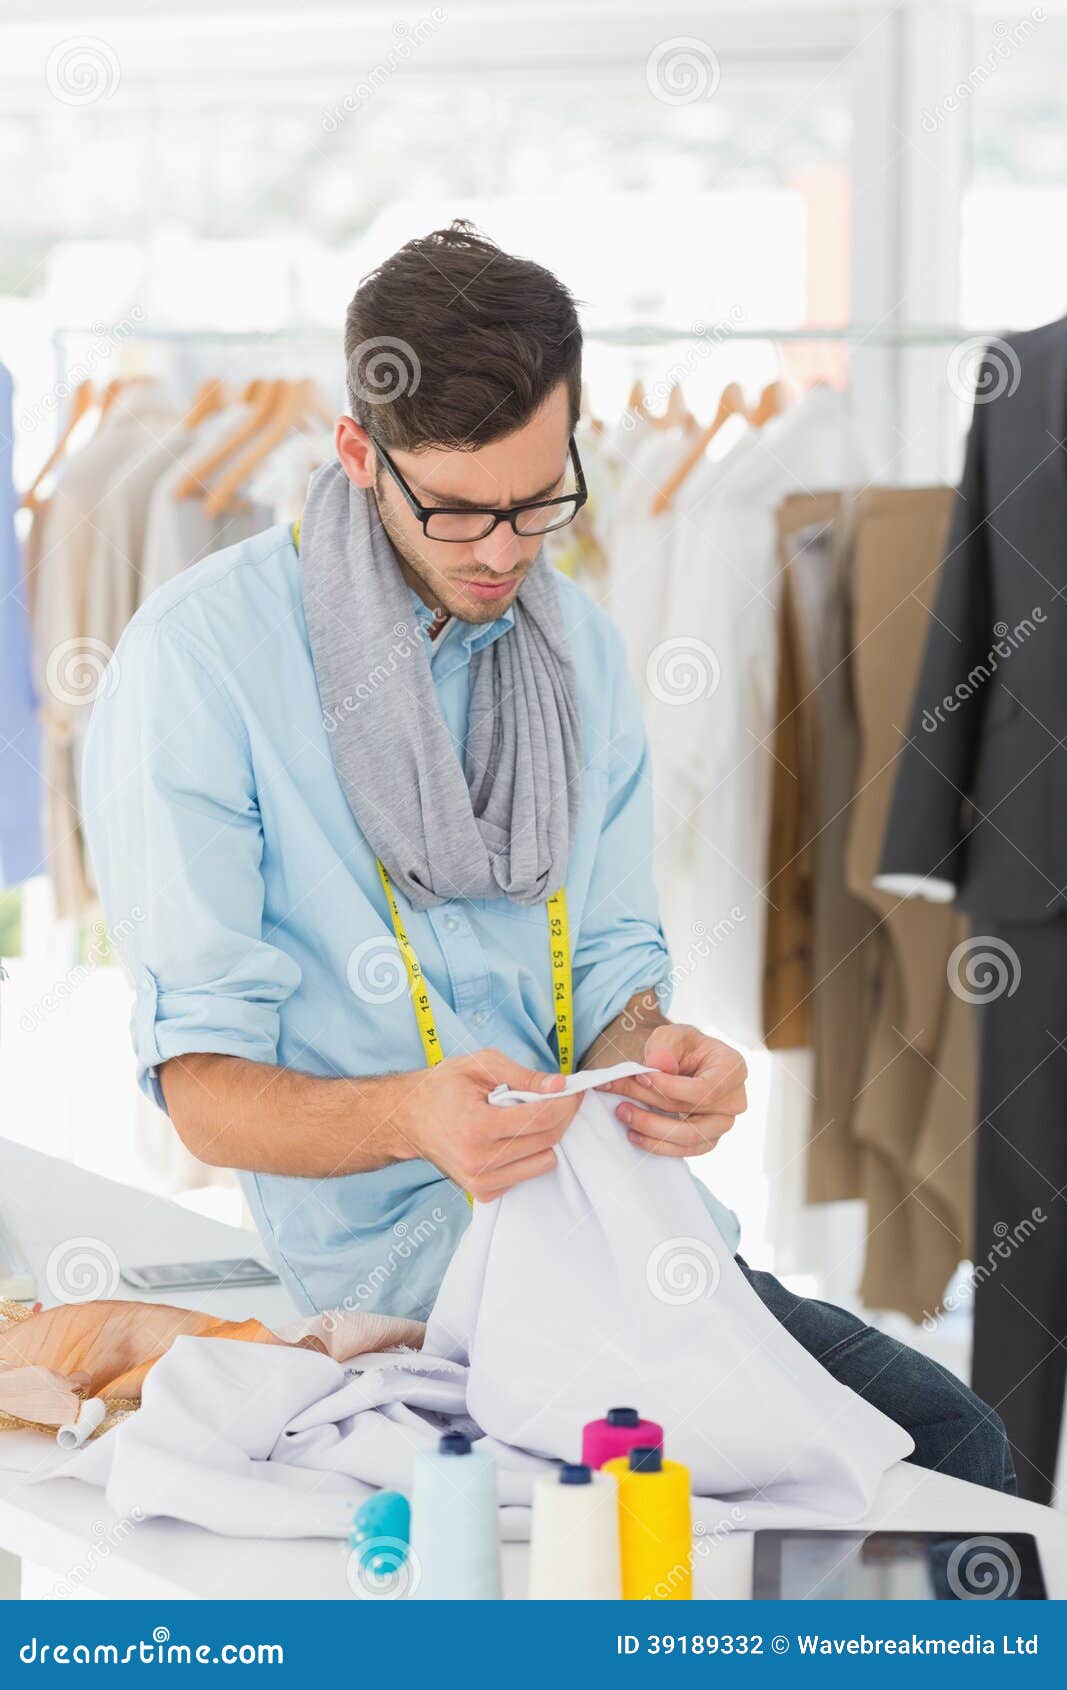 Concentrated Male Fashion Designer At Work Stock Photo 